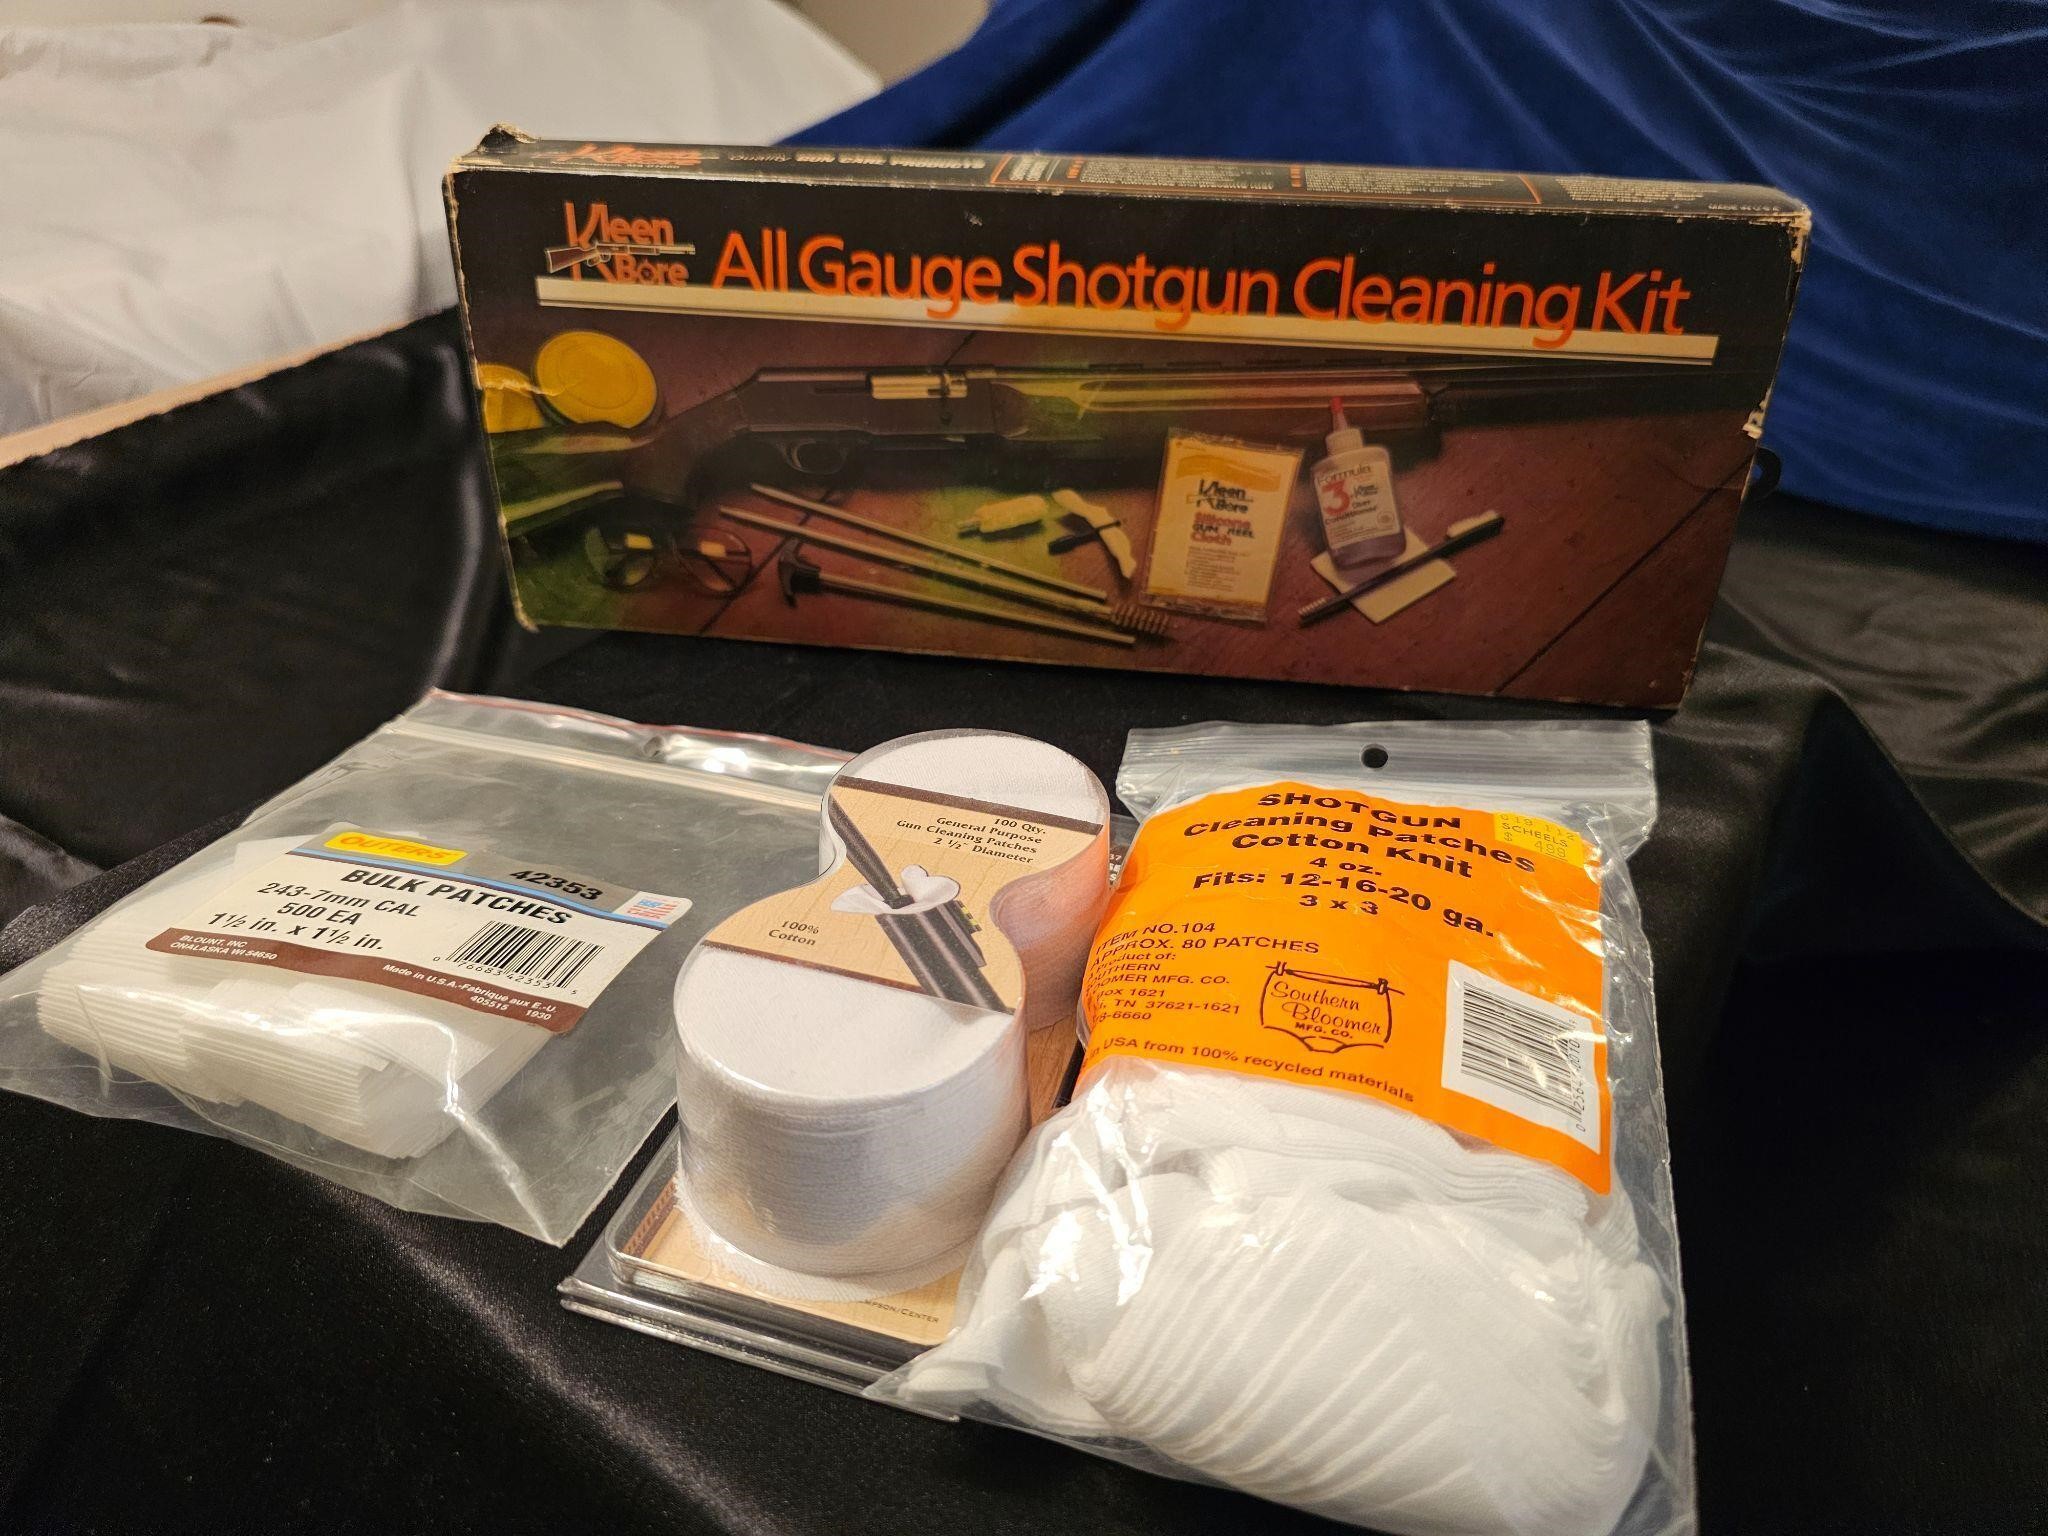 All gauge shotgun cleaning kit with patches